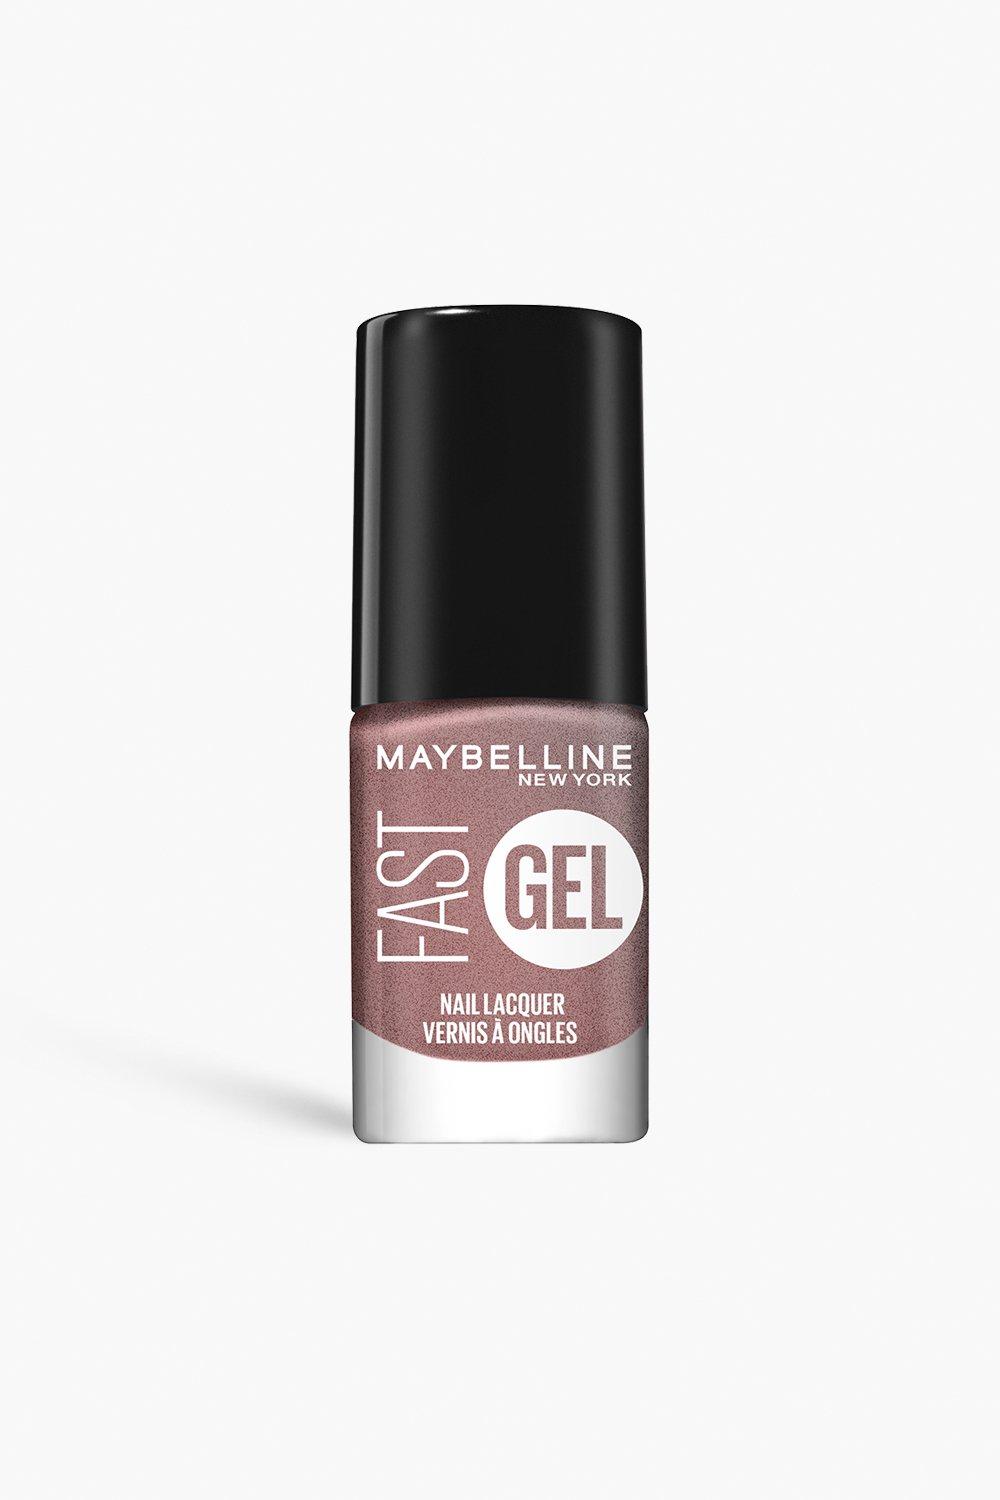 Maybelline Fast Gel Nail Lacquer Long-Lasting Nail Polish, Nude